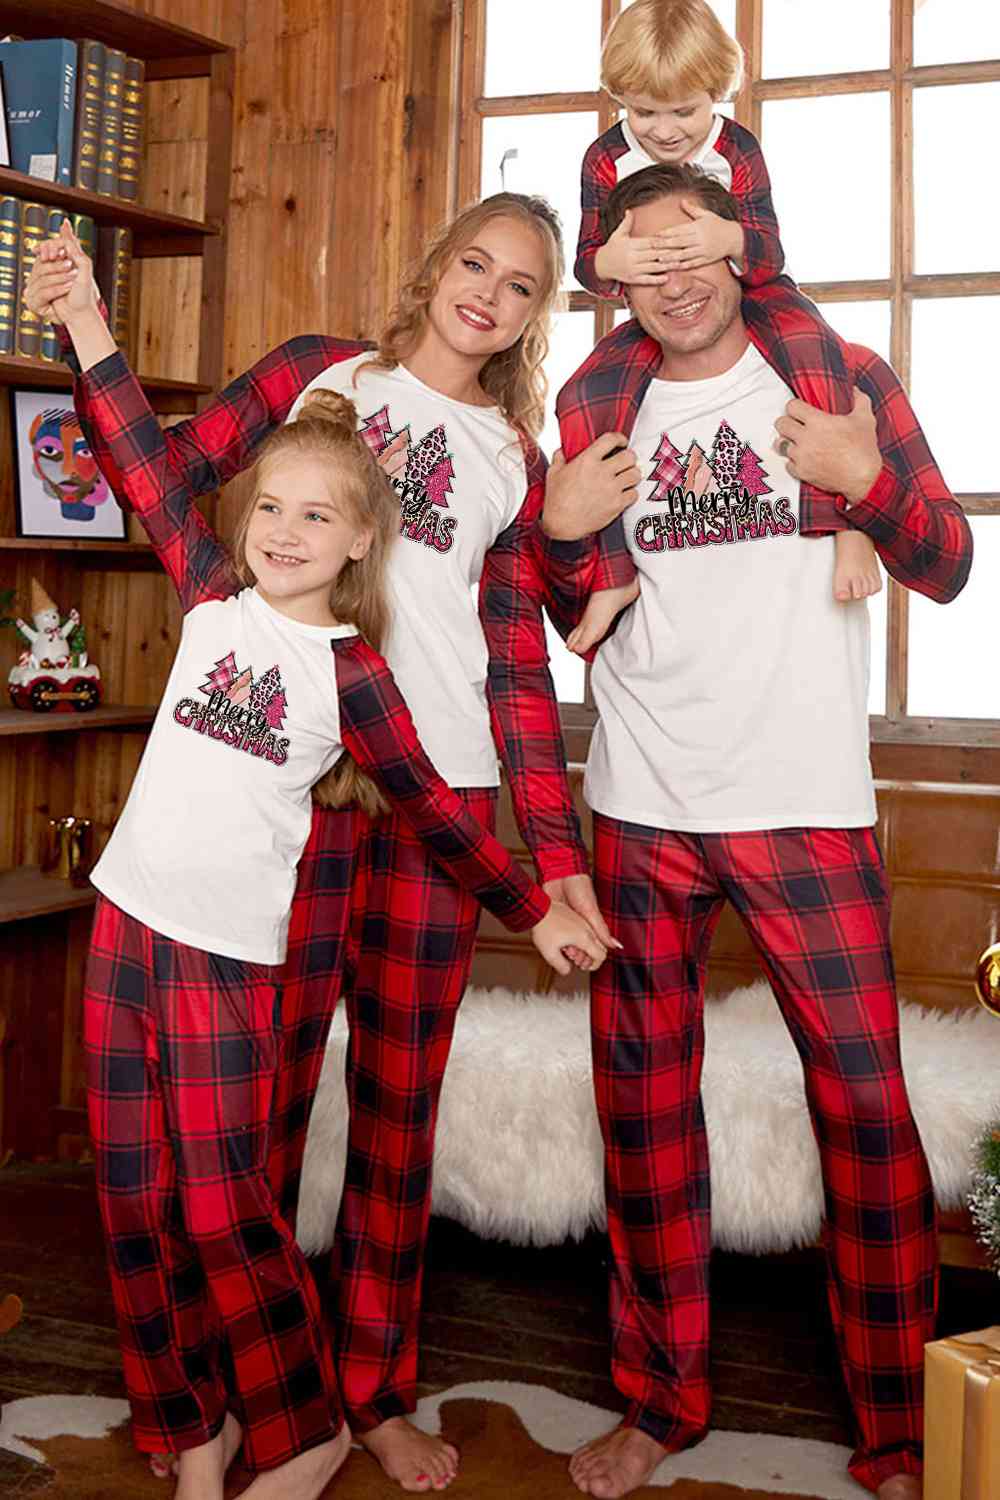 MERRY CHRISTMAS Graphic Top and Plaid Pants Set - Bottoms - Outfit Sets - 3 - 2024